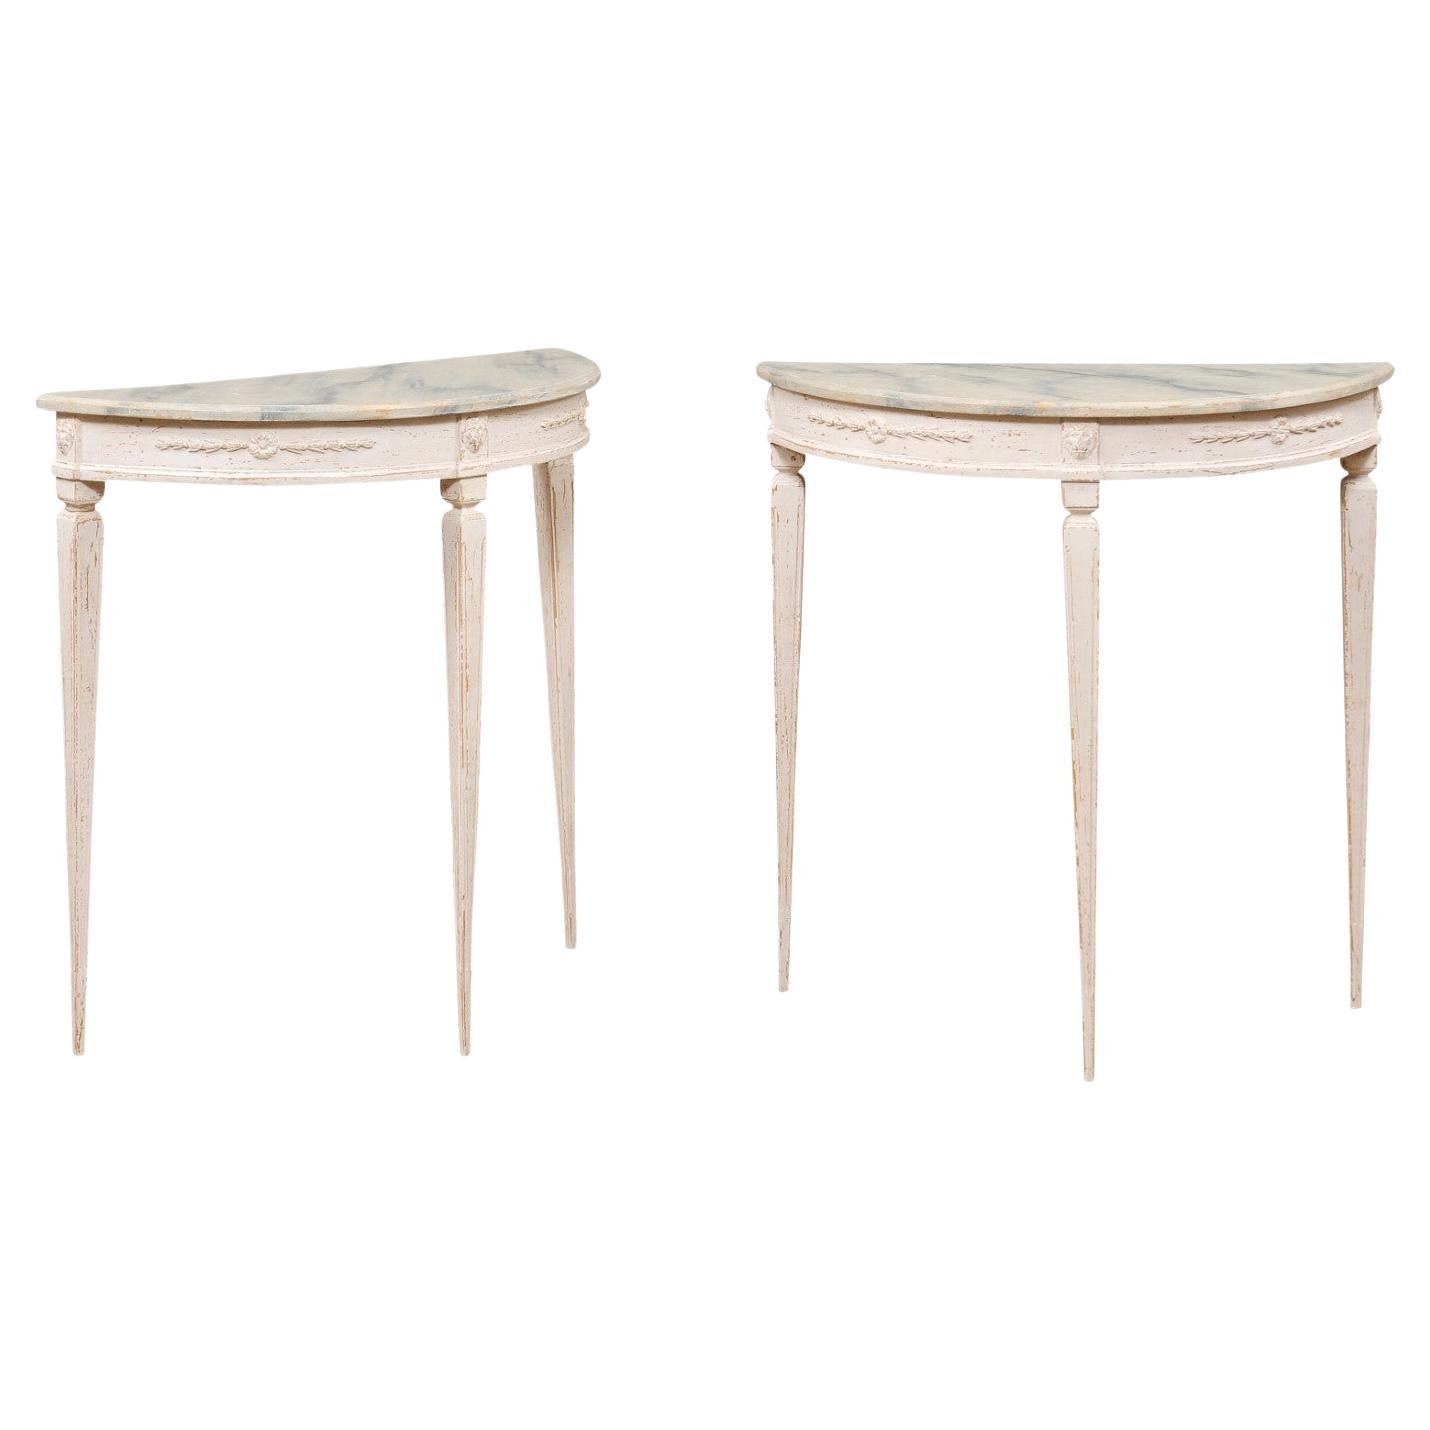 Pair of Swedish 1920s Gustavian Style Painted Demilune Tables with Carved Aprons For Sale